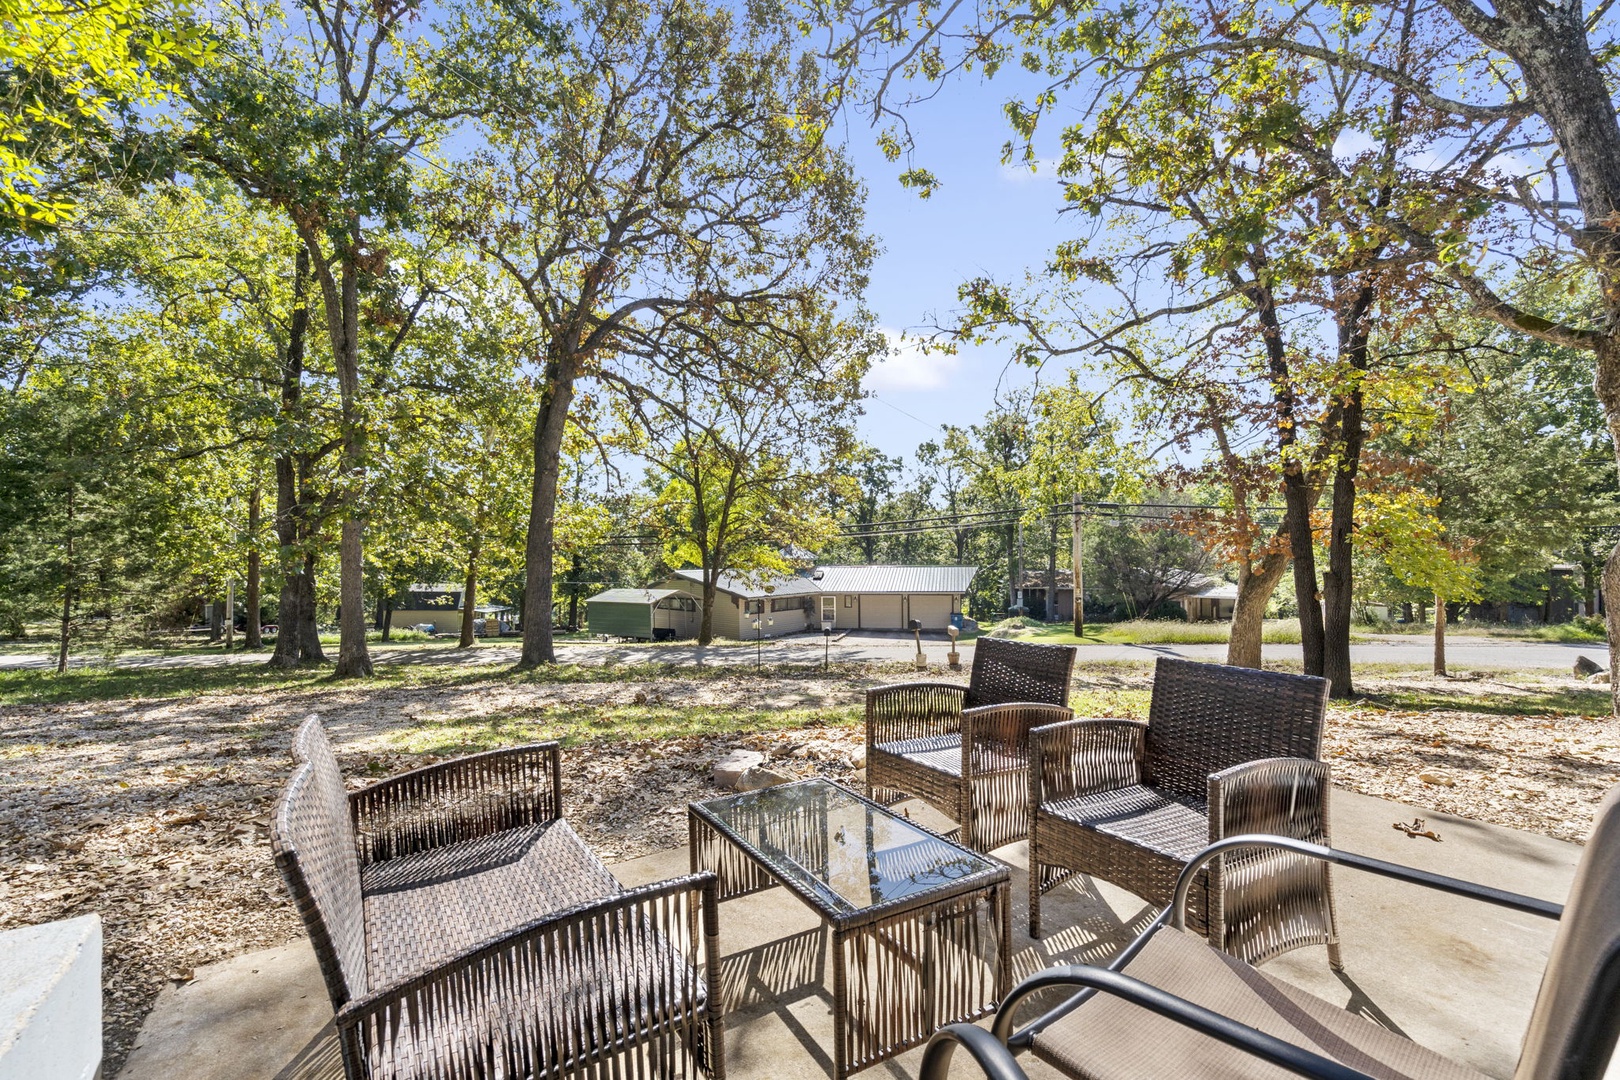 Step outside to enjoy lounging the day away on the patio